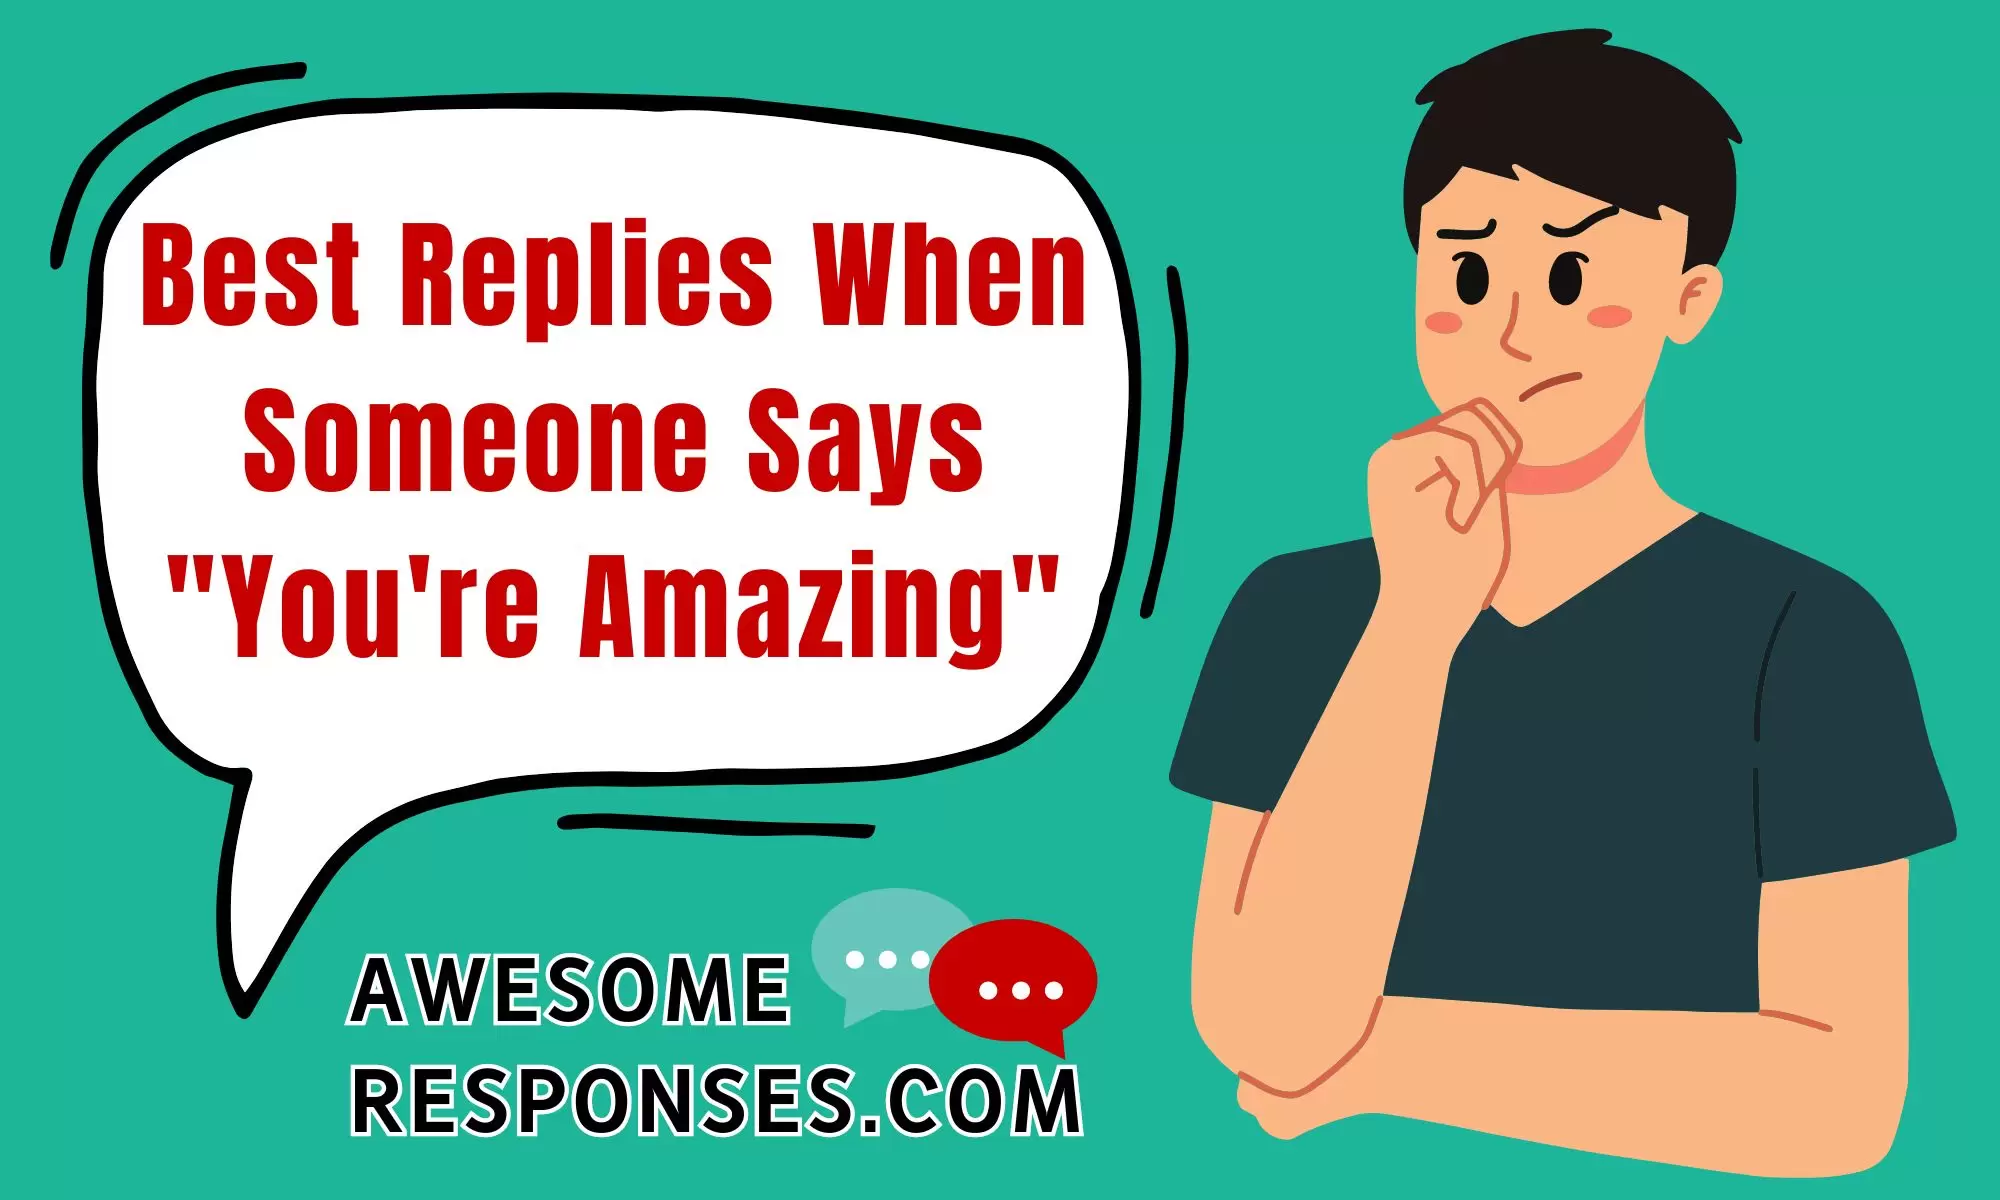 Best Replies When Someone Says "You're Amazing"